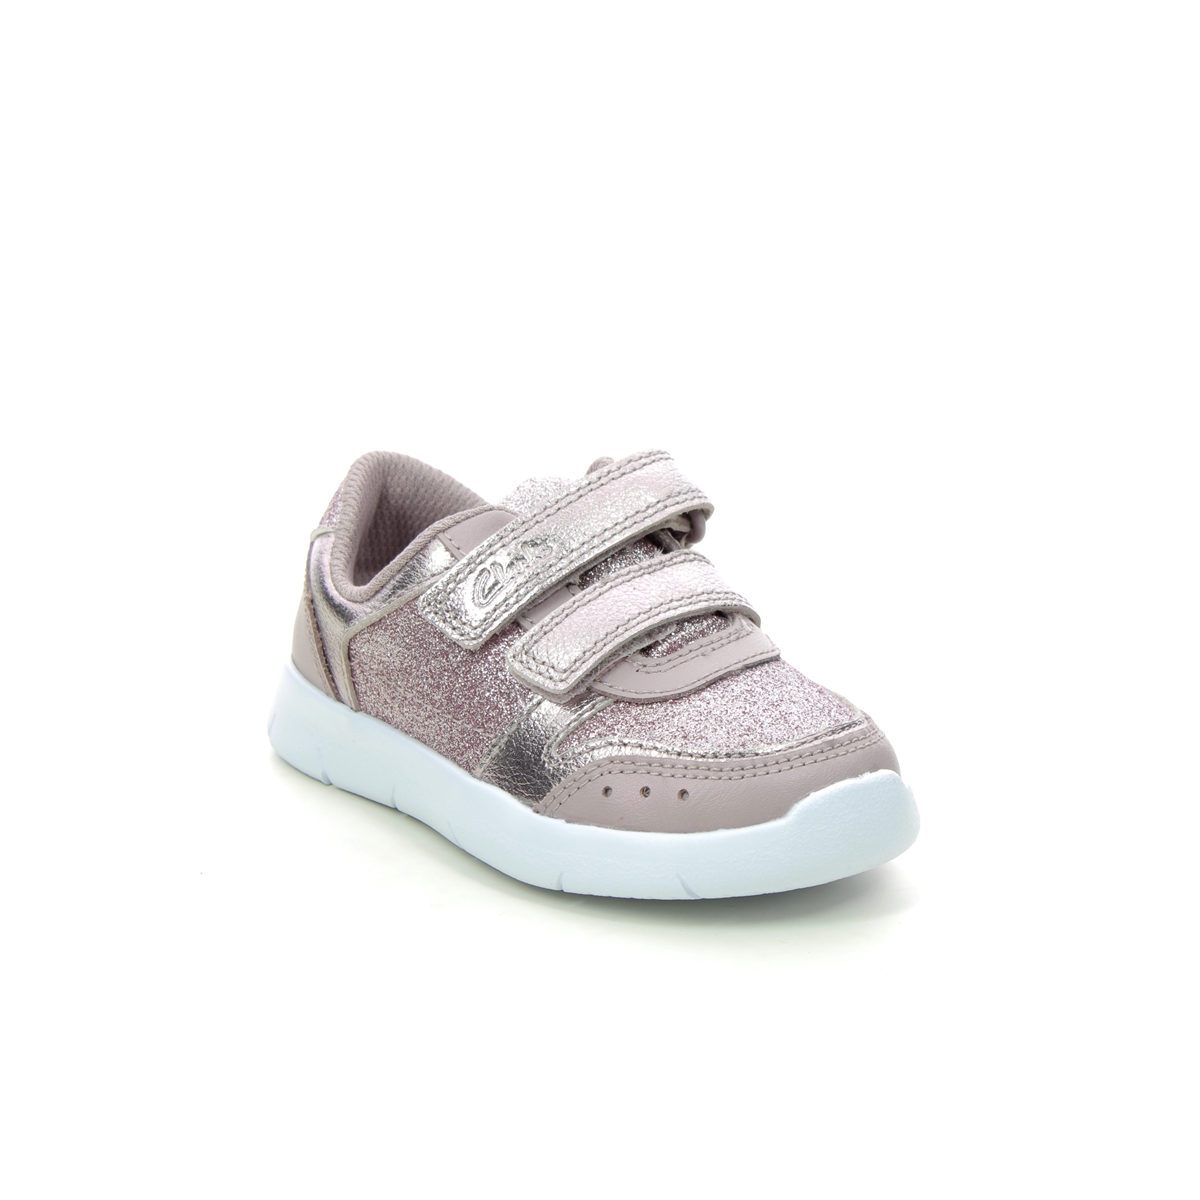 Clarks Ath Sonar T Pink Kids Toddler Girls Trainers 683727G In Size 6.5 In Plain Pink G Width Fitting For kids